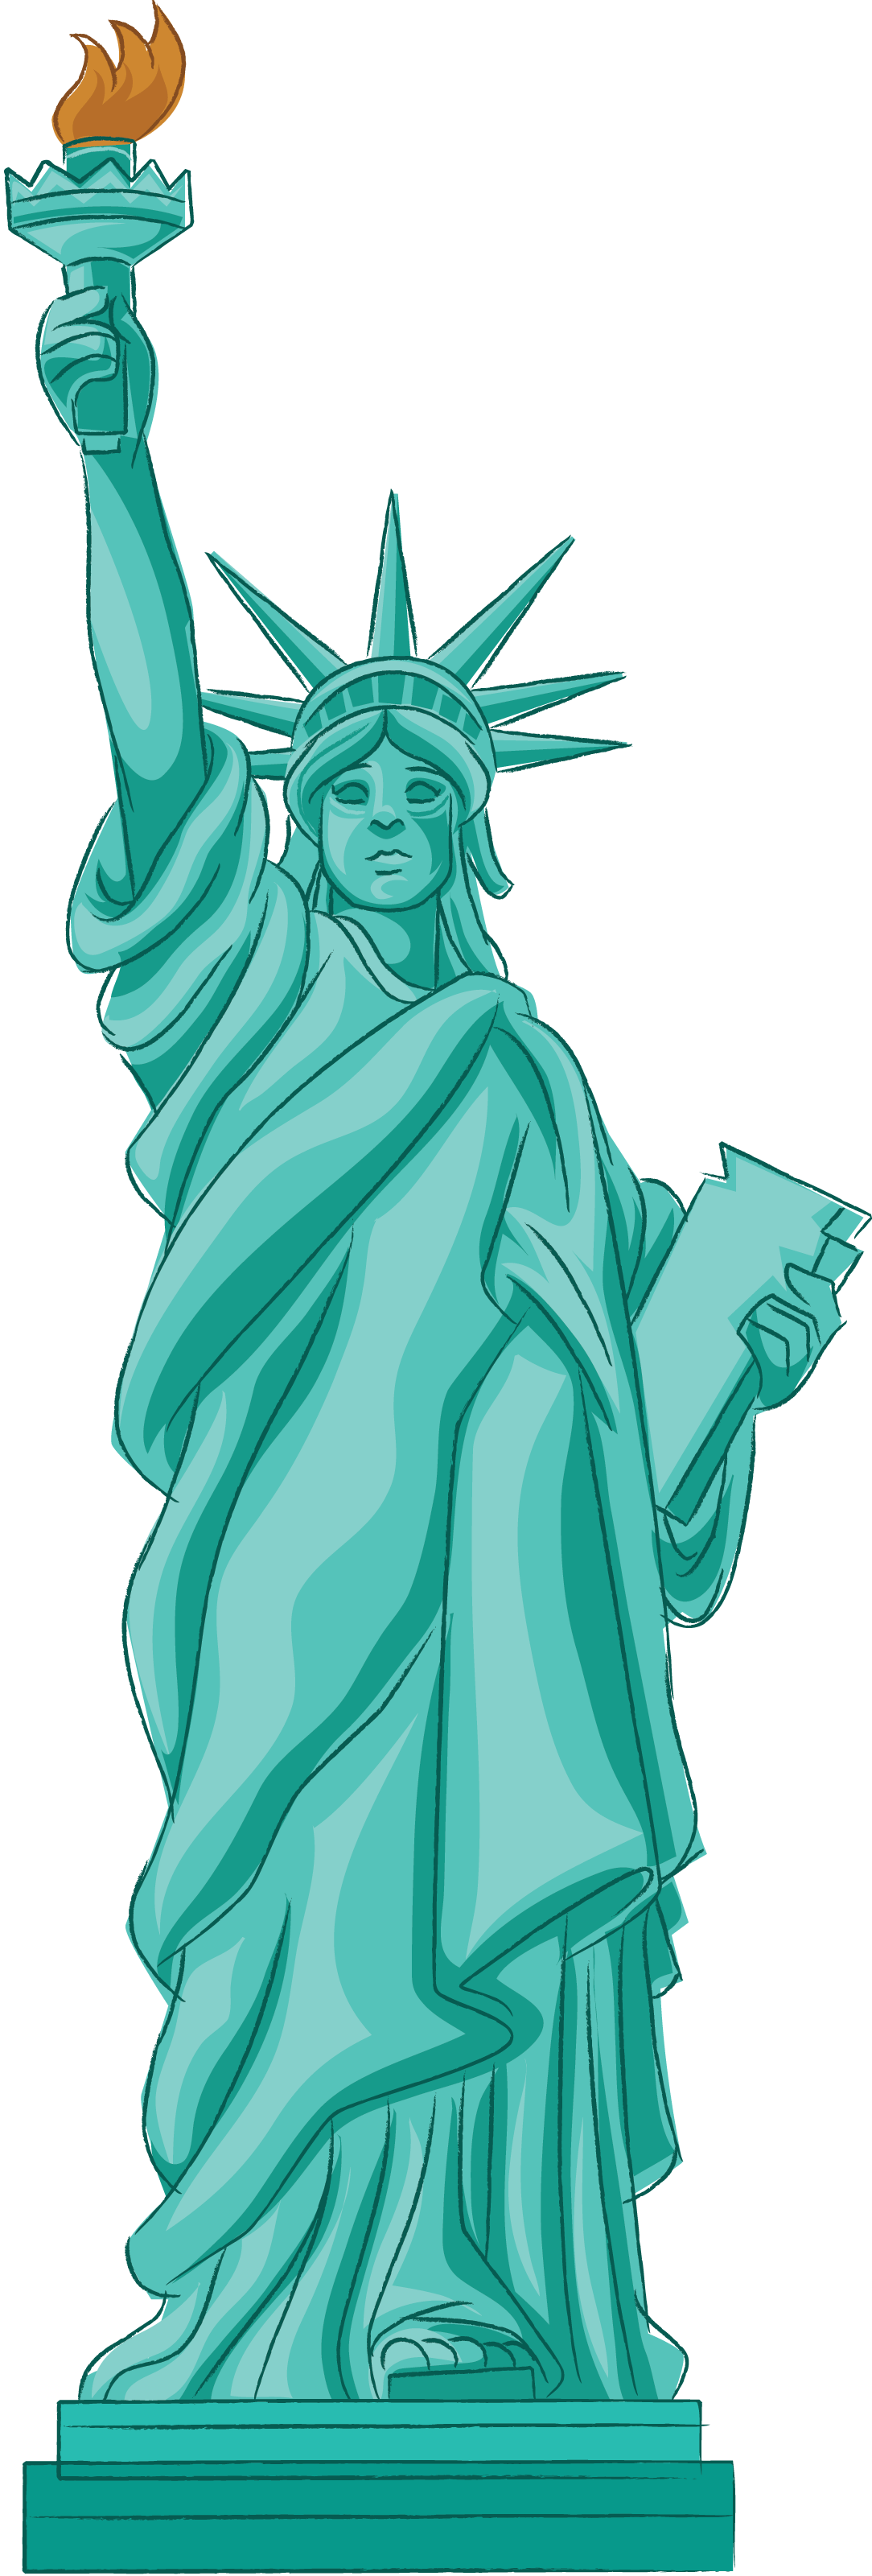 Statue Of Liberty Clip Art Images - Gallery